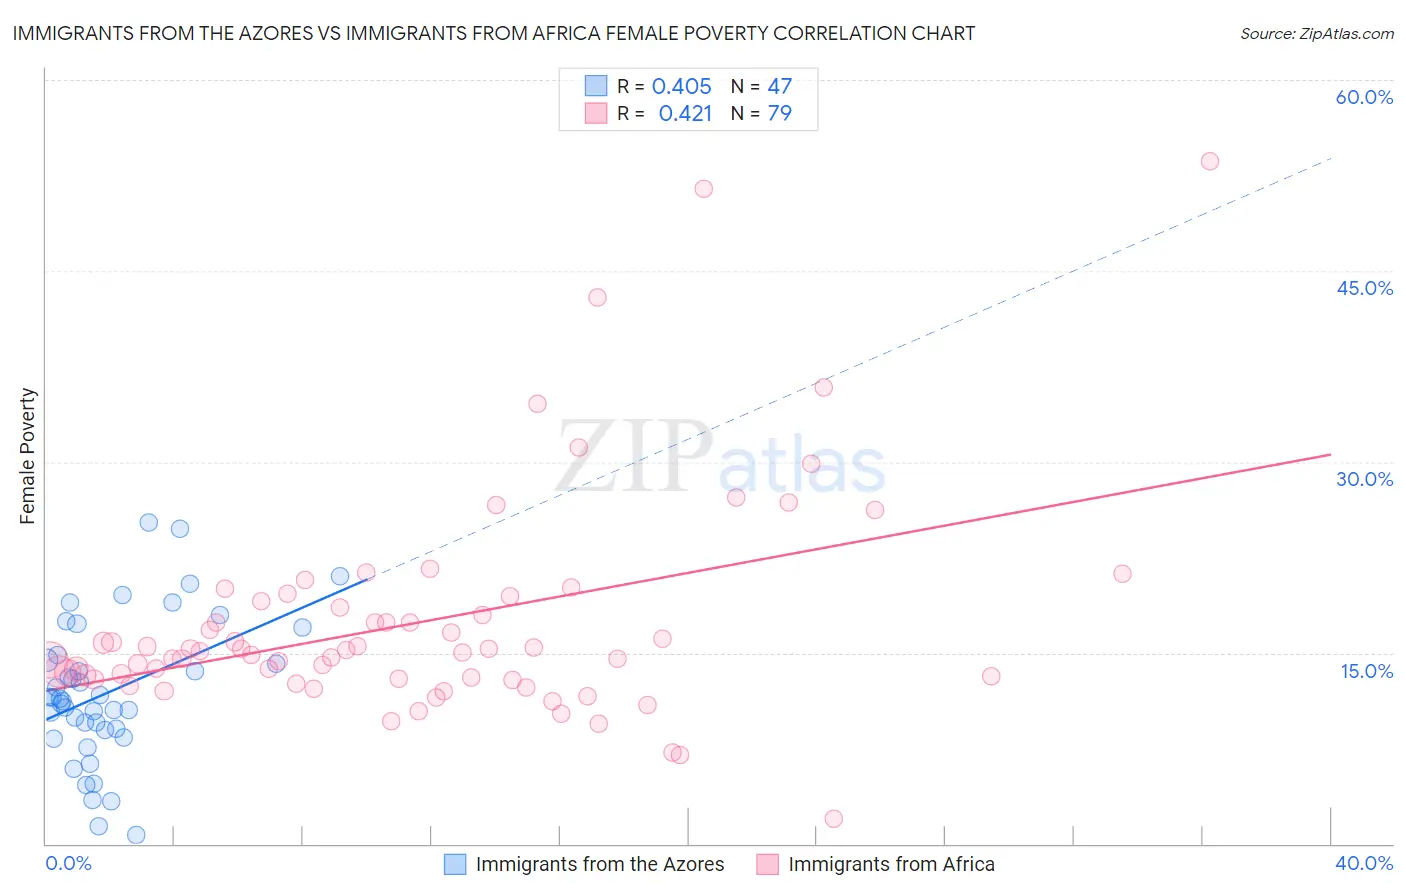 Immigrants from the Azores vs Immigrants from Africa Female Poverty